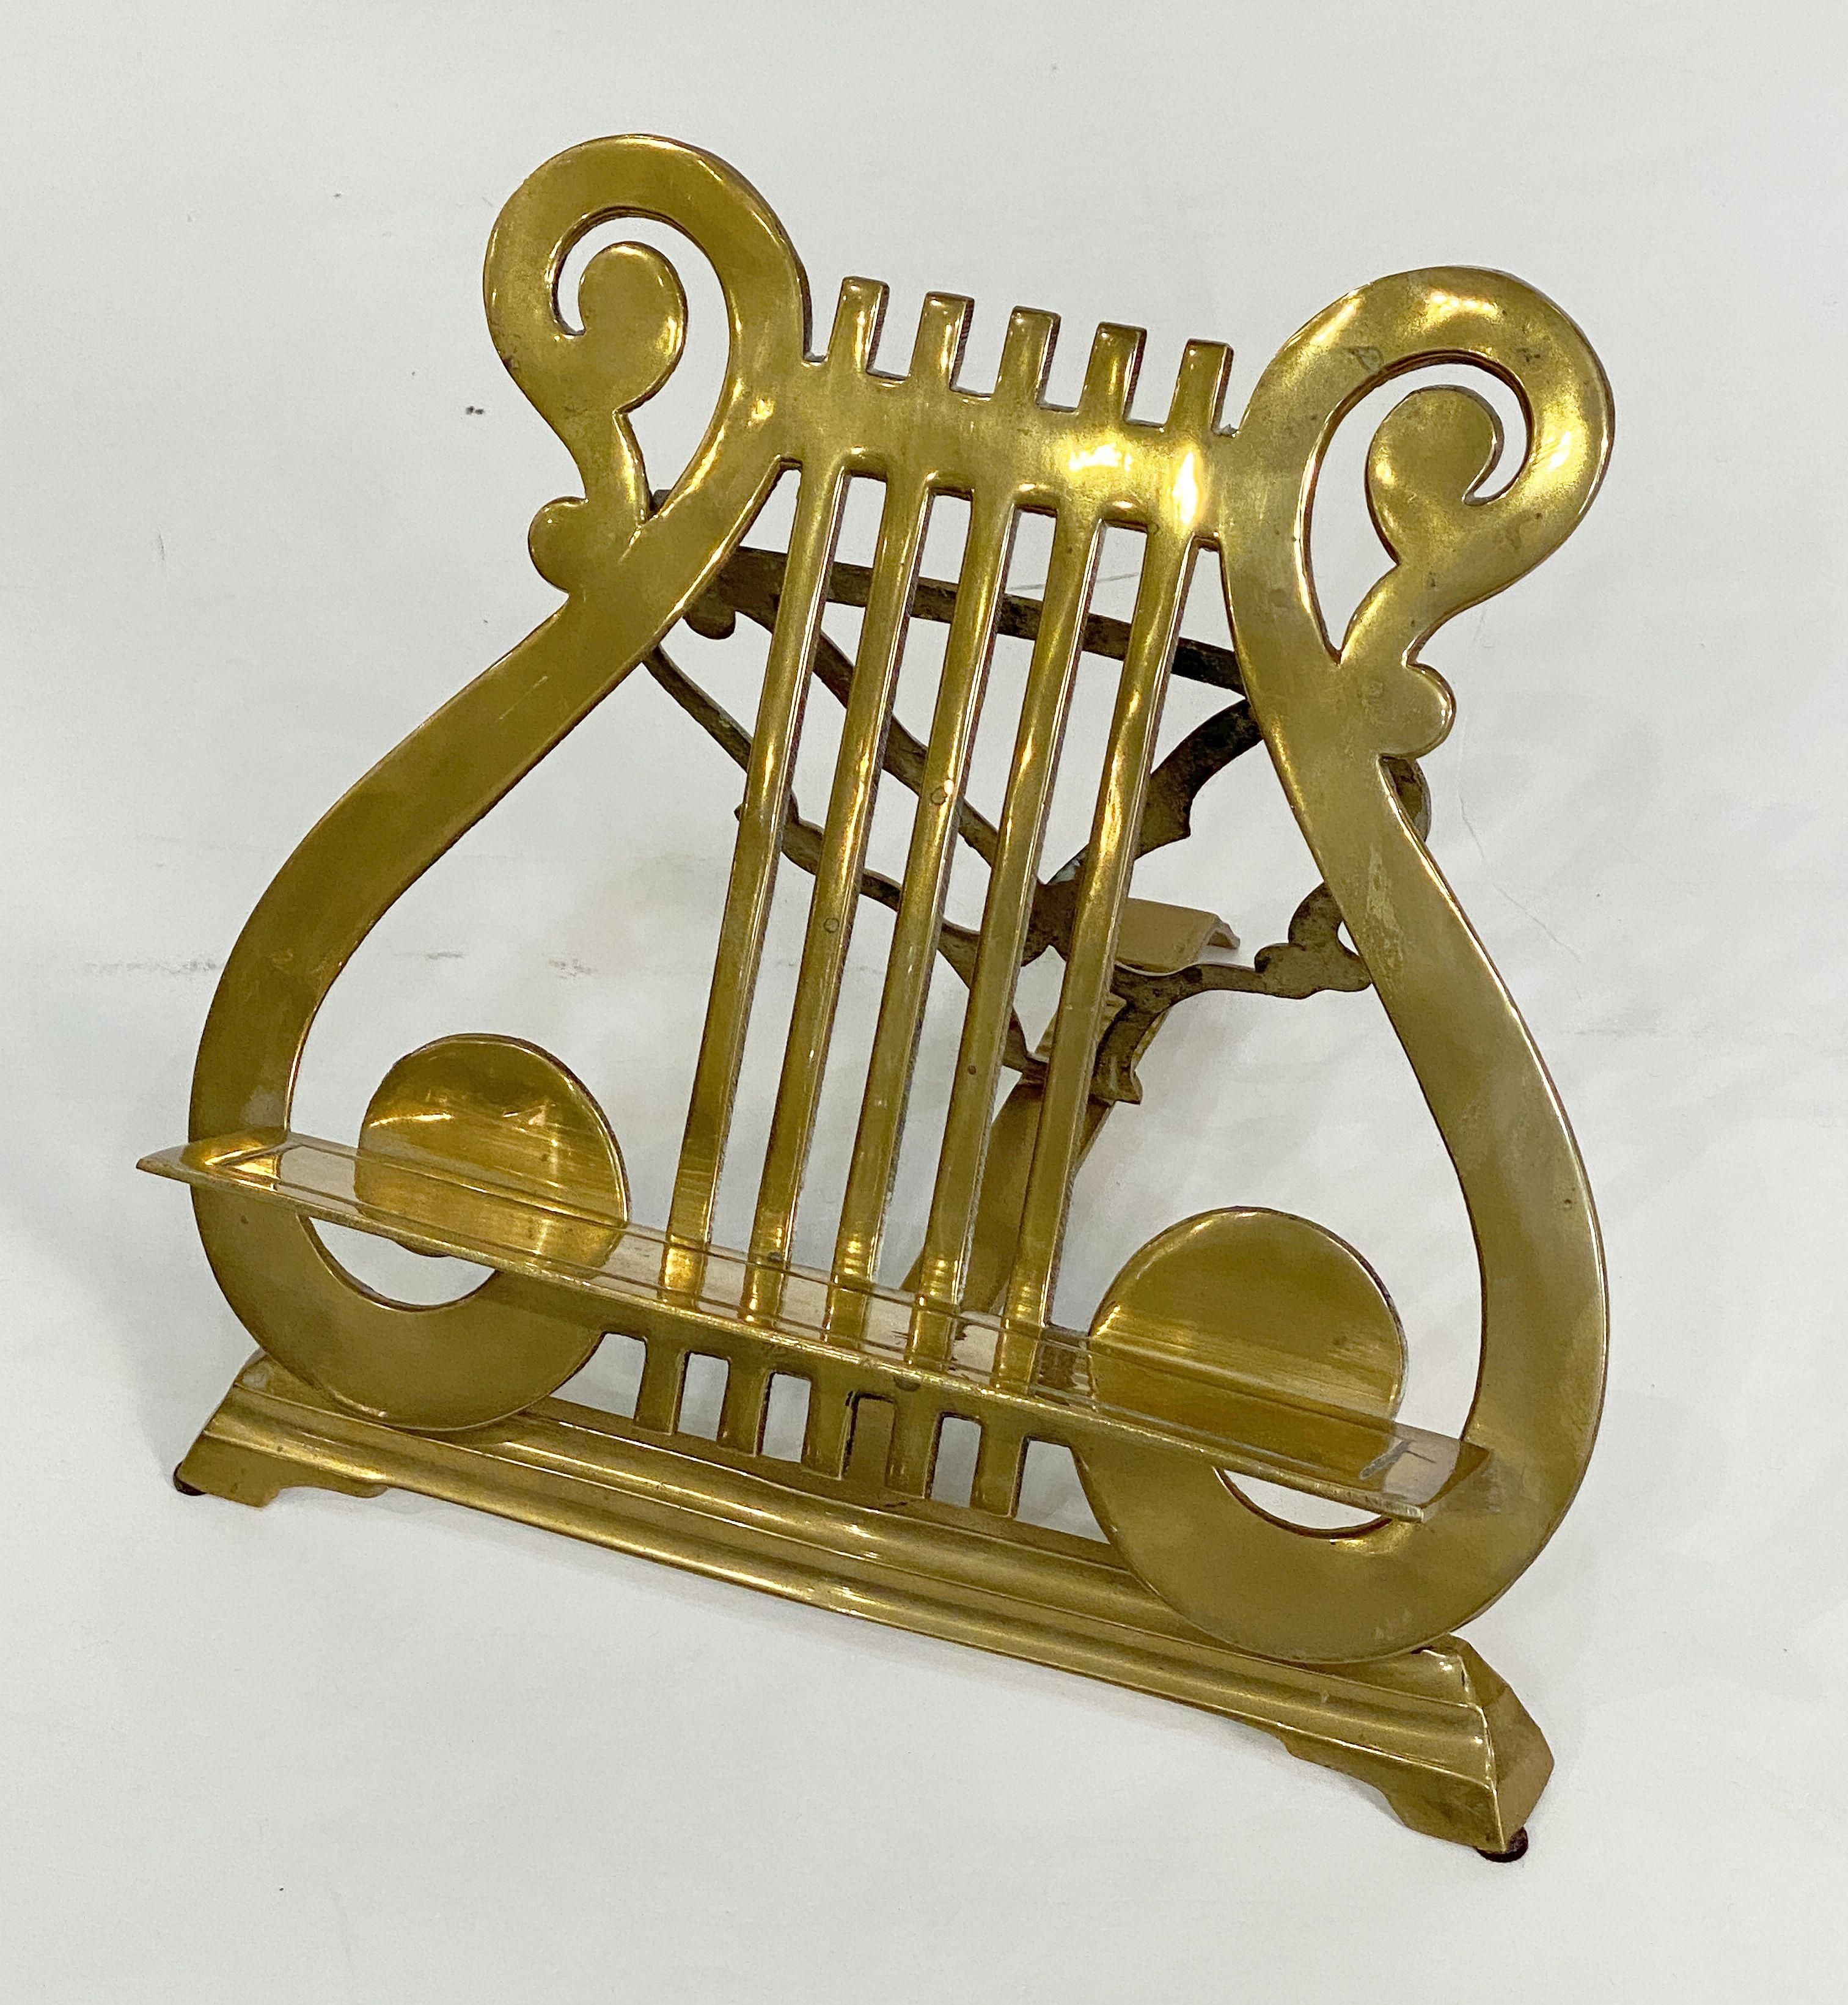 Metal English Lyre-Shaped Book Lectern or Music Stand of Brass For Sale